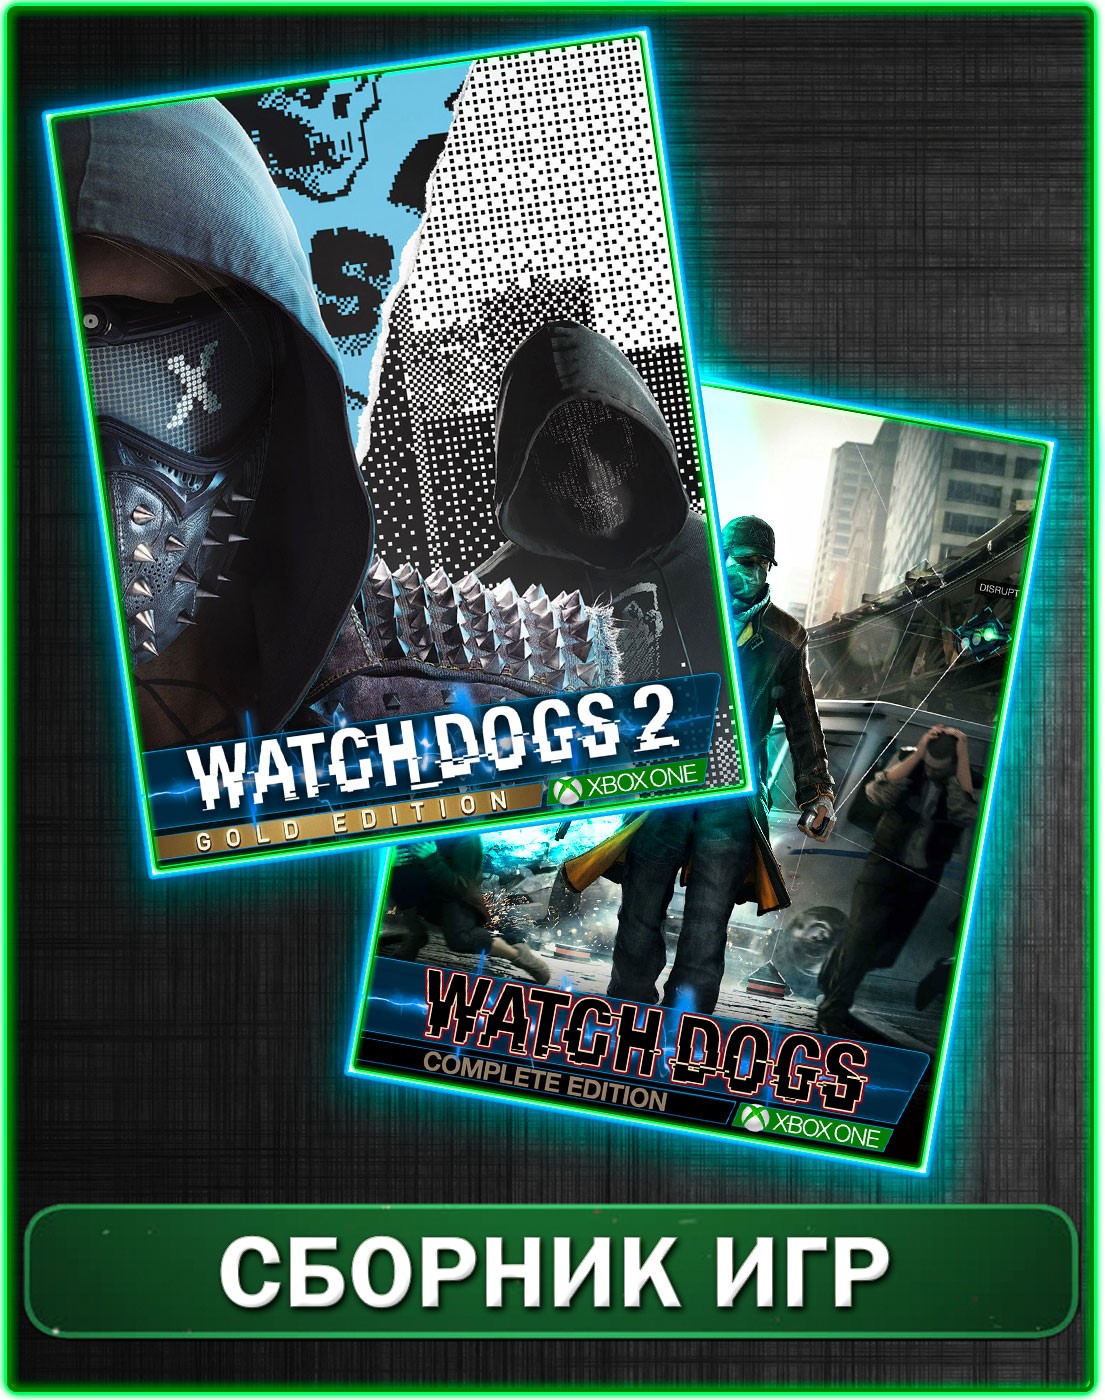 Watch Dogs+Watch Dogs 2 Gold Editions Bundle XBOX ONE